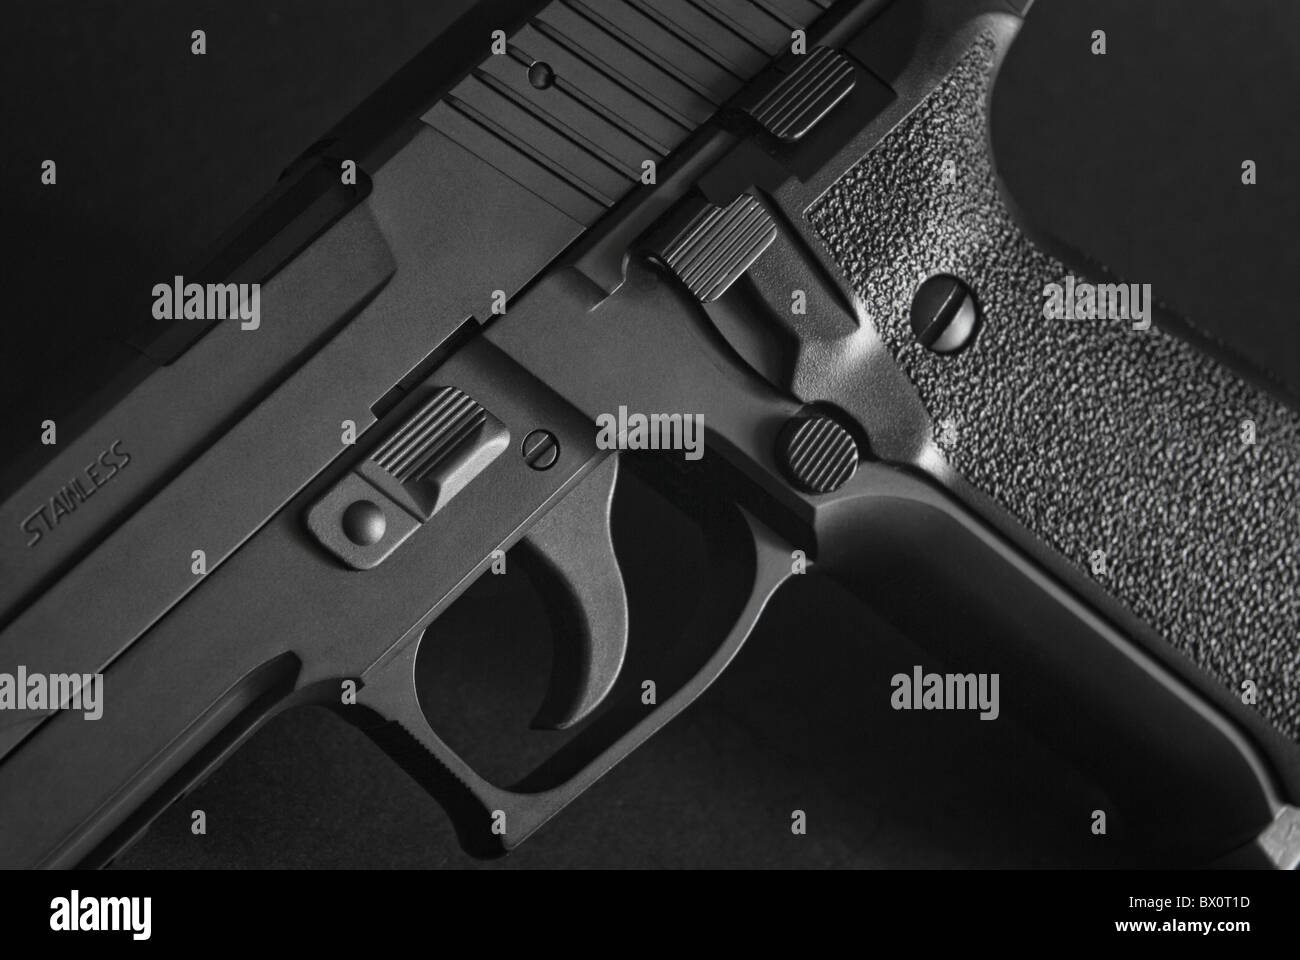 close up of a black automatic firearm Stock Photo